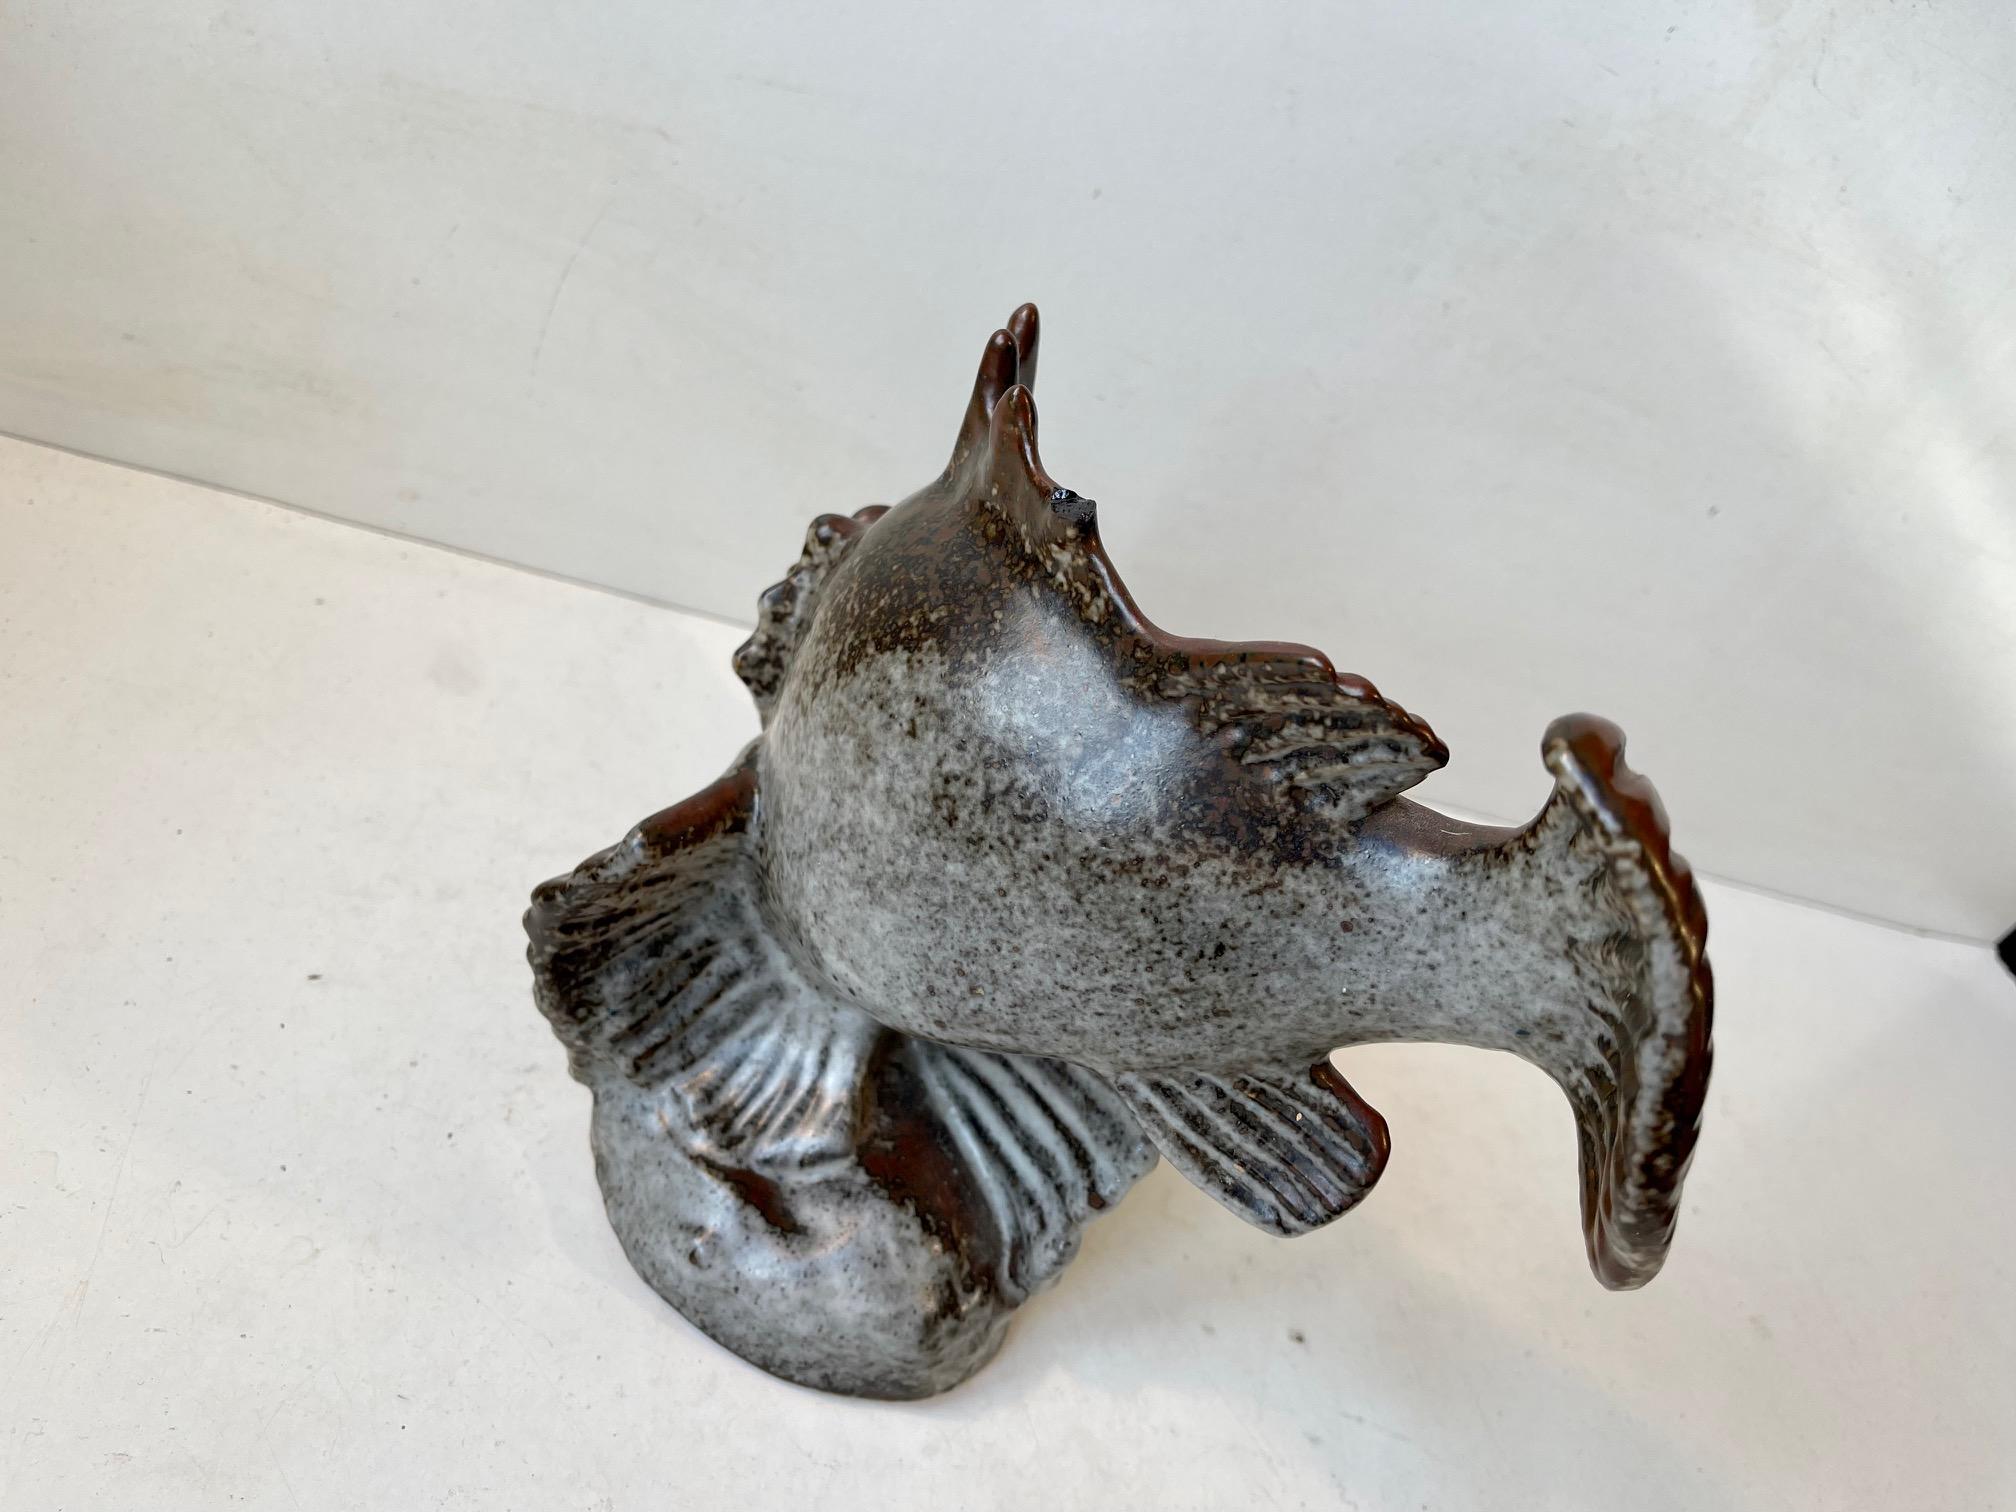 Saxbo Stoneware Dragon Fish Sculpture by Hugo Liisberg In Good Condition For Sale In Esbjerg, DK